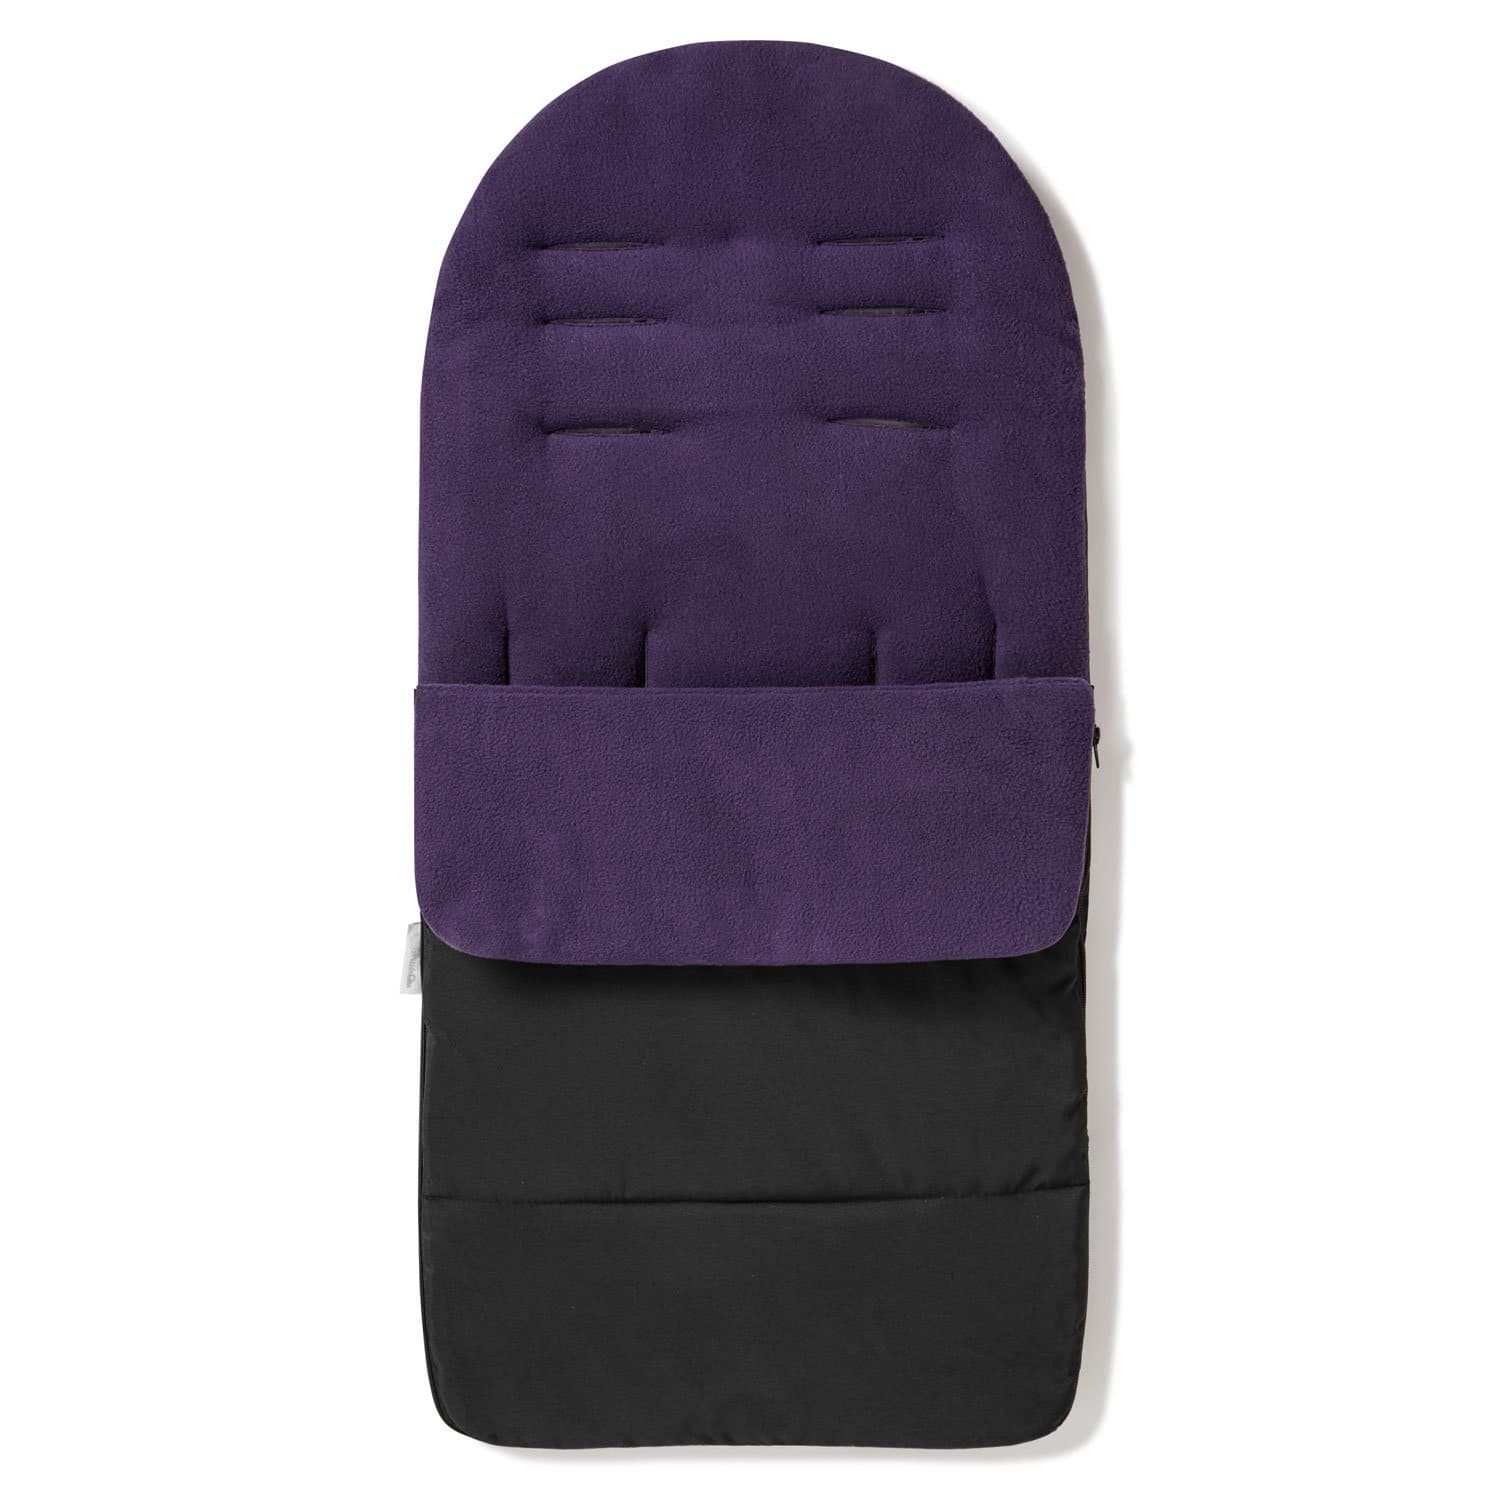 Premium Footmuff / Cosy Toes Compatible with Excel - Plum Purple / Fits All Models | For Your Little One